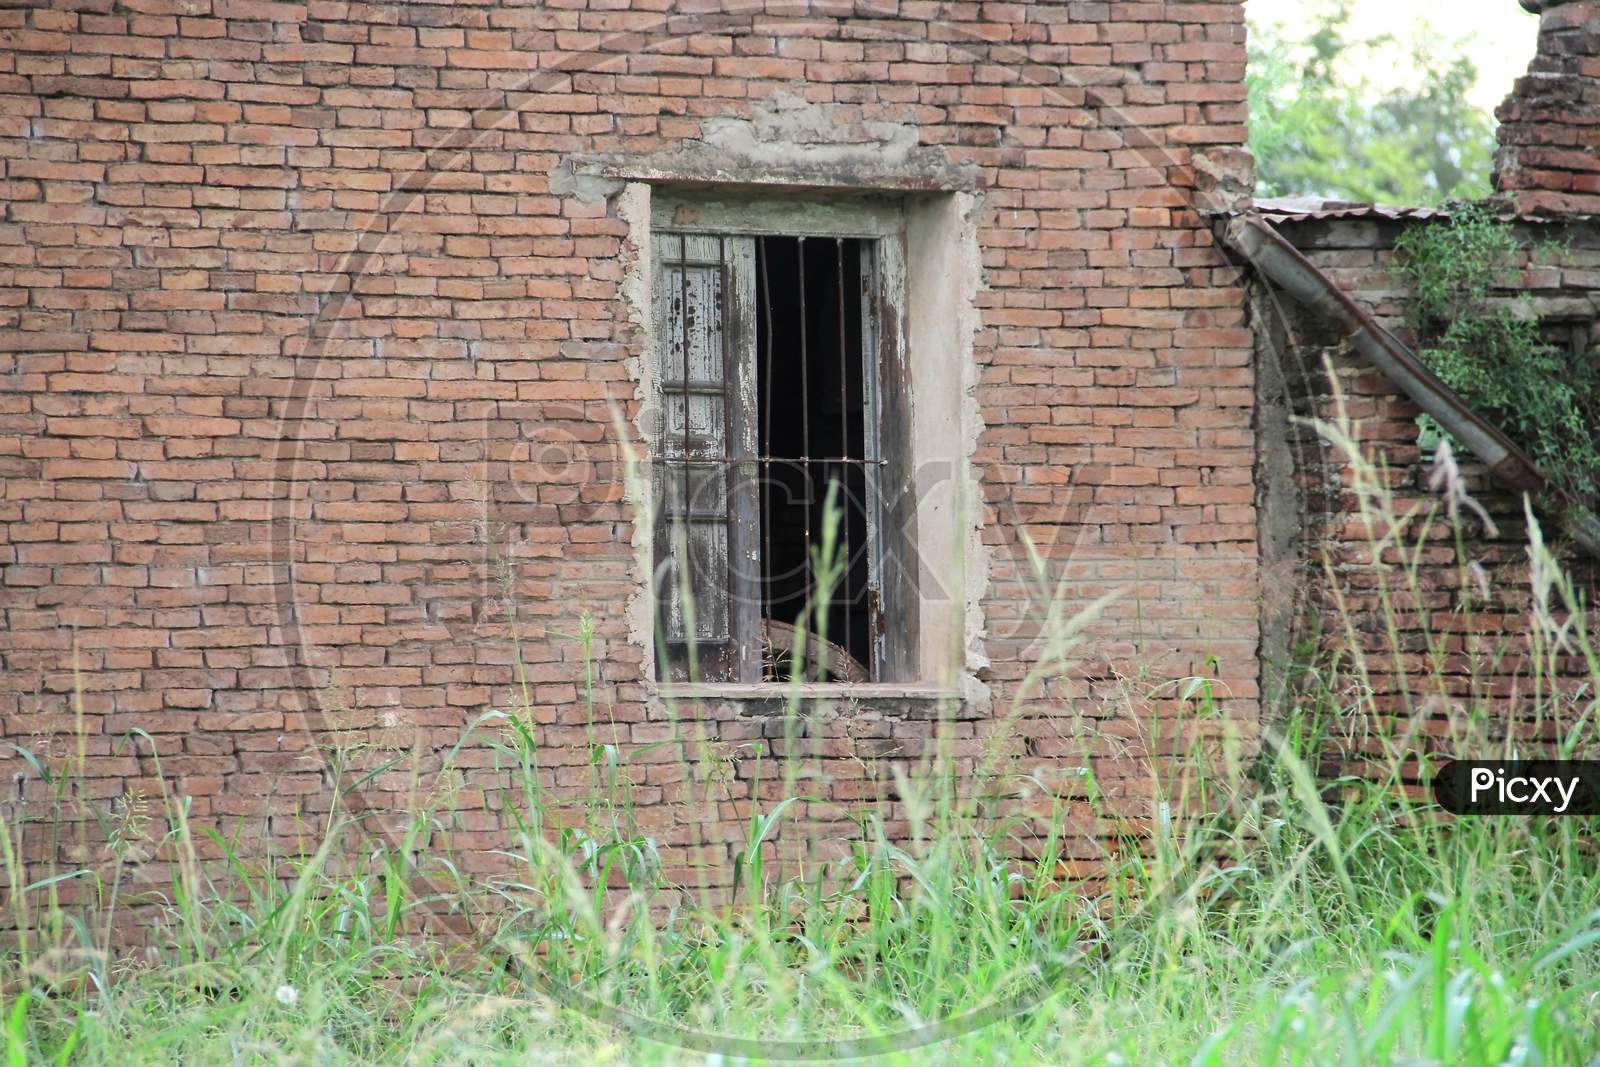 Window Of Abandoned House In The Argentinean Countryside